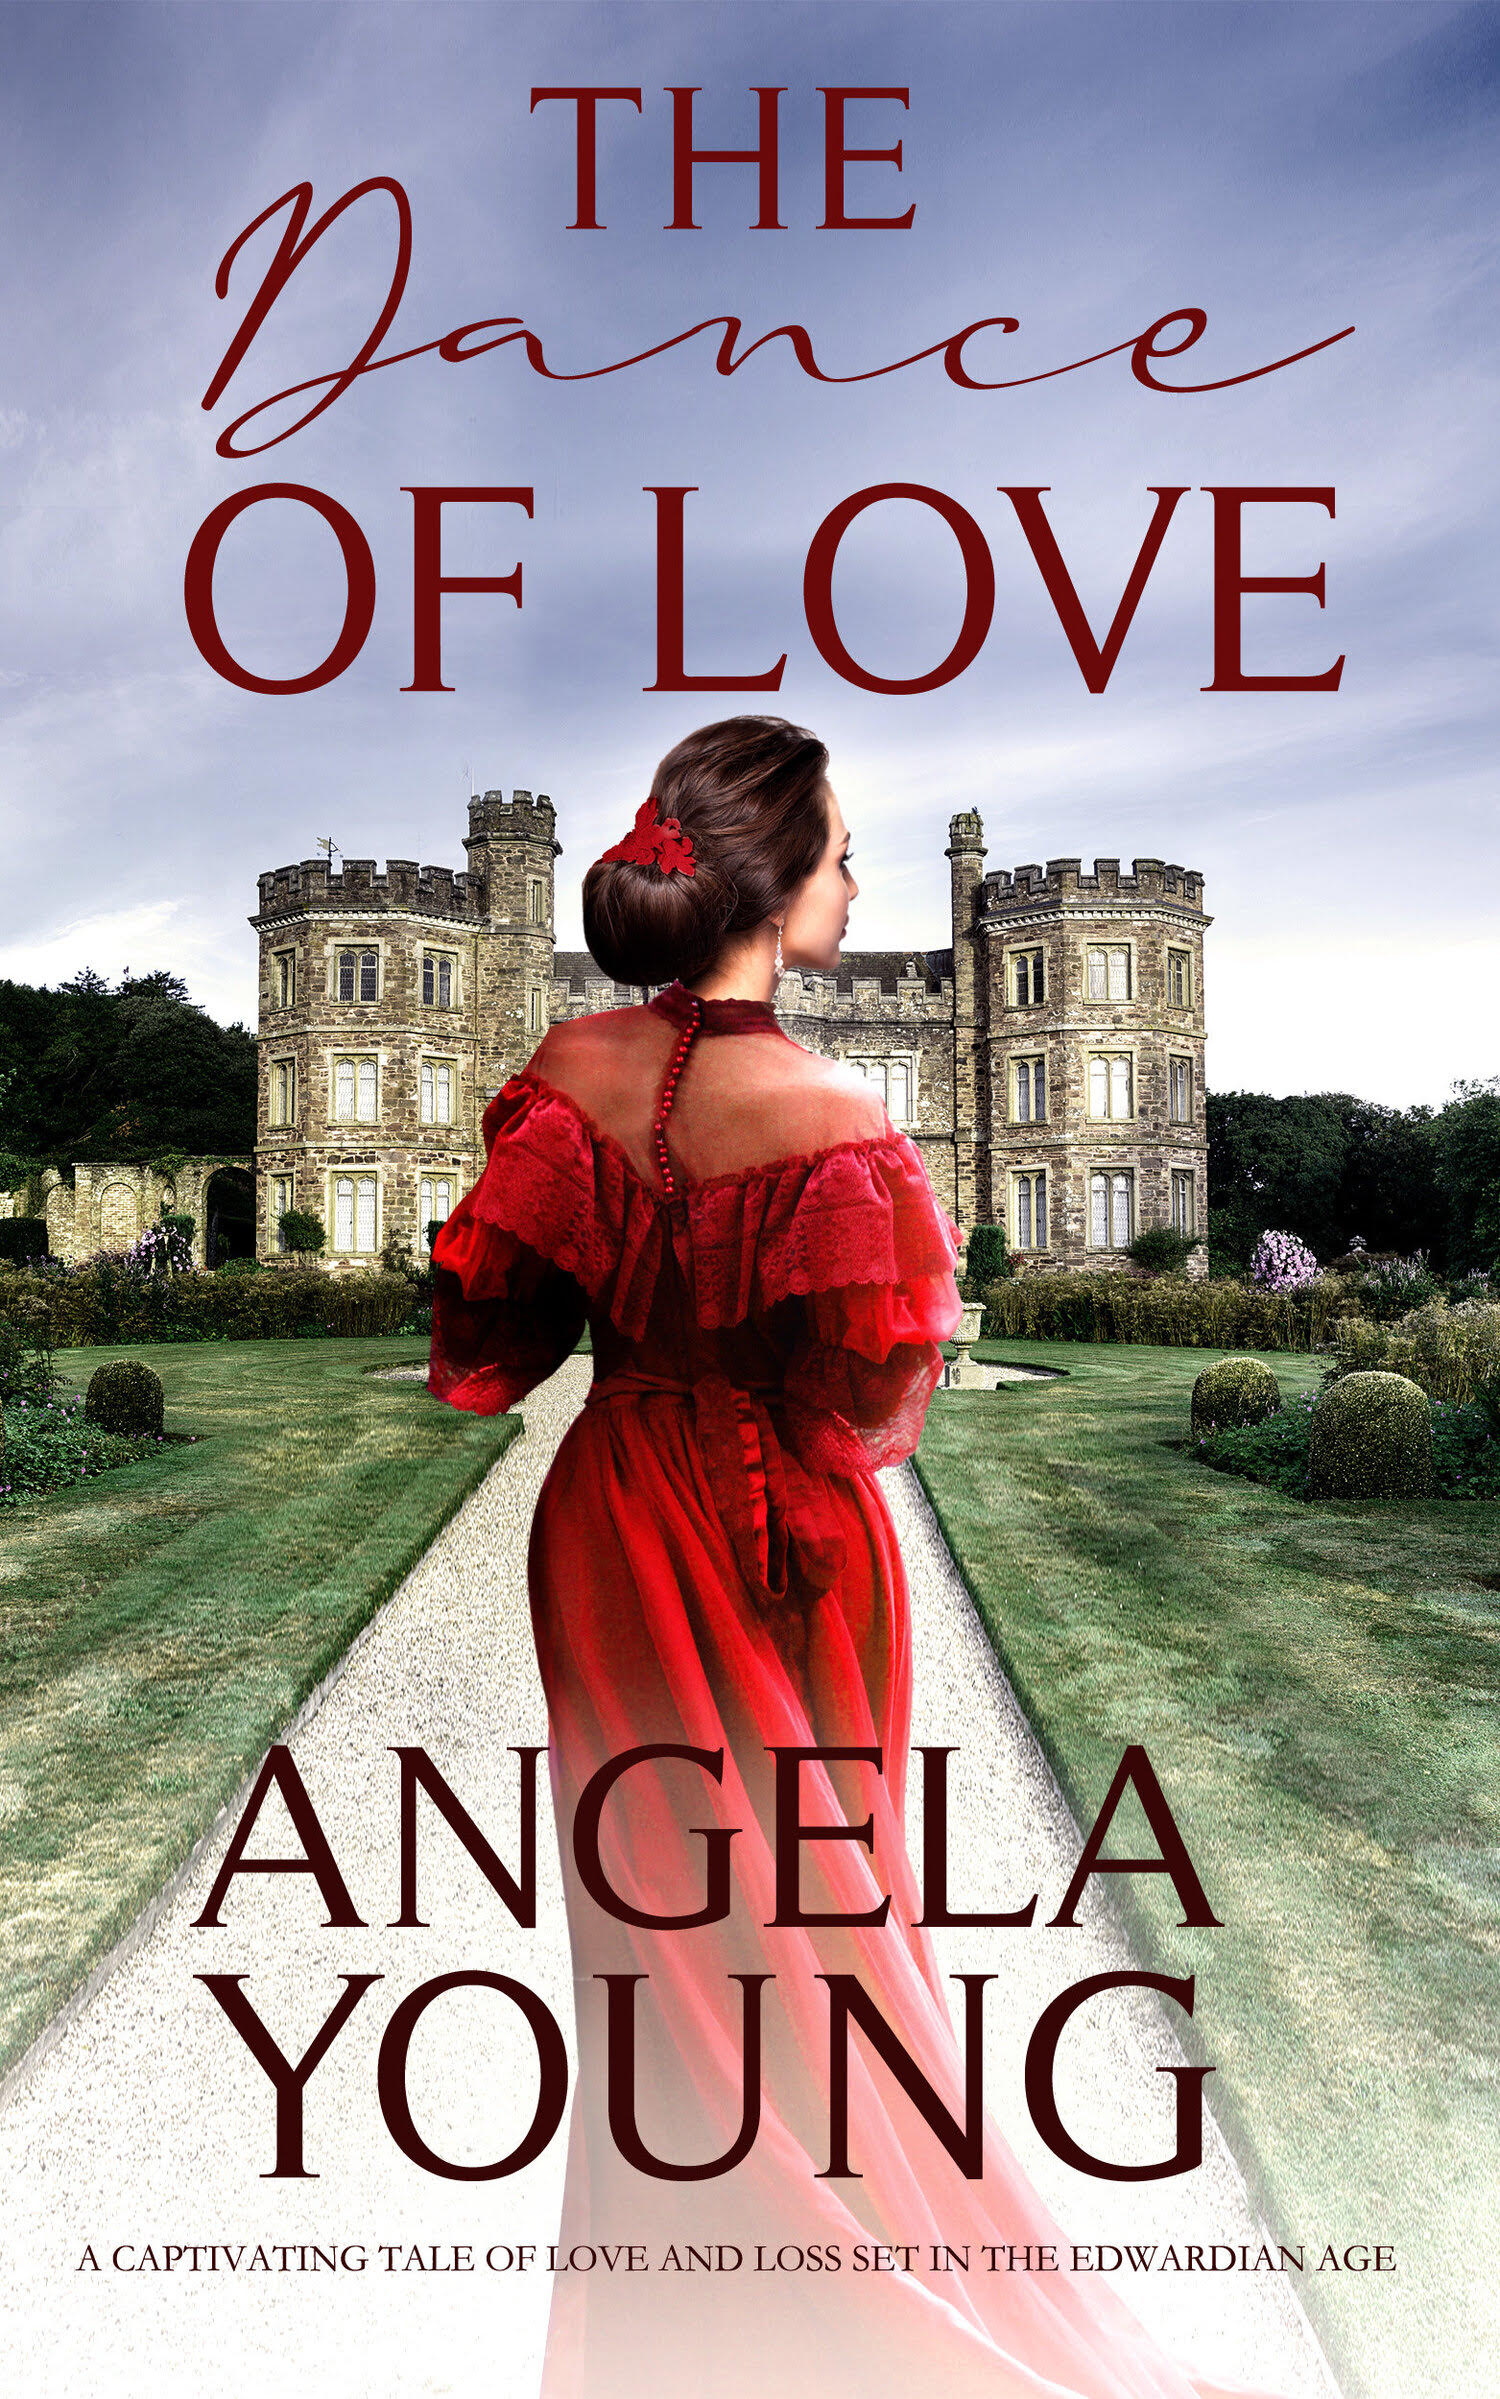 The Dance of Love by Angela Young